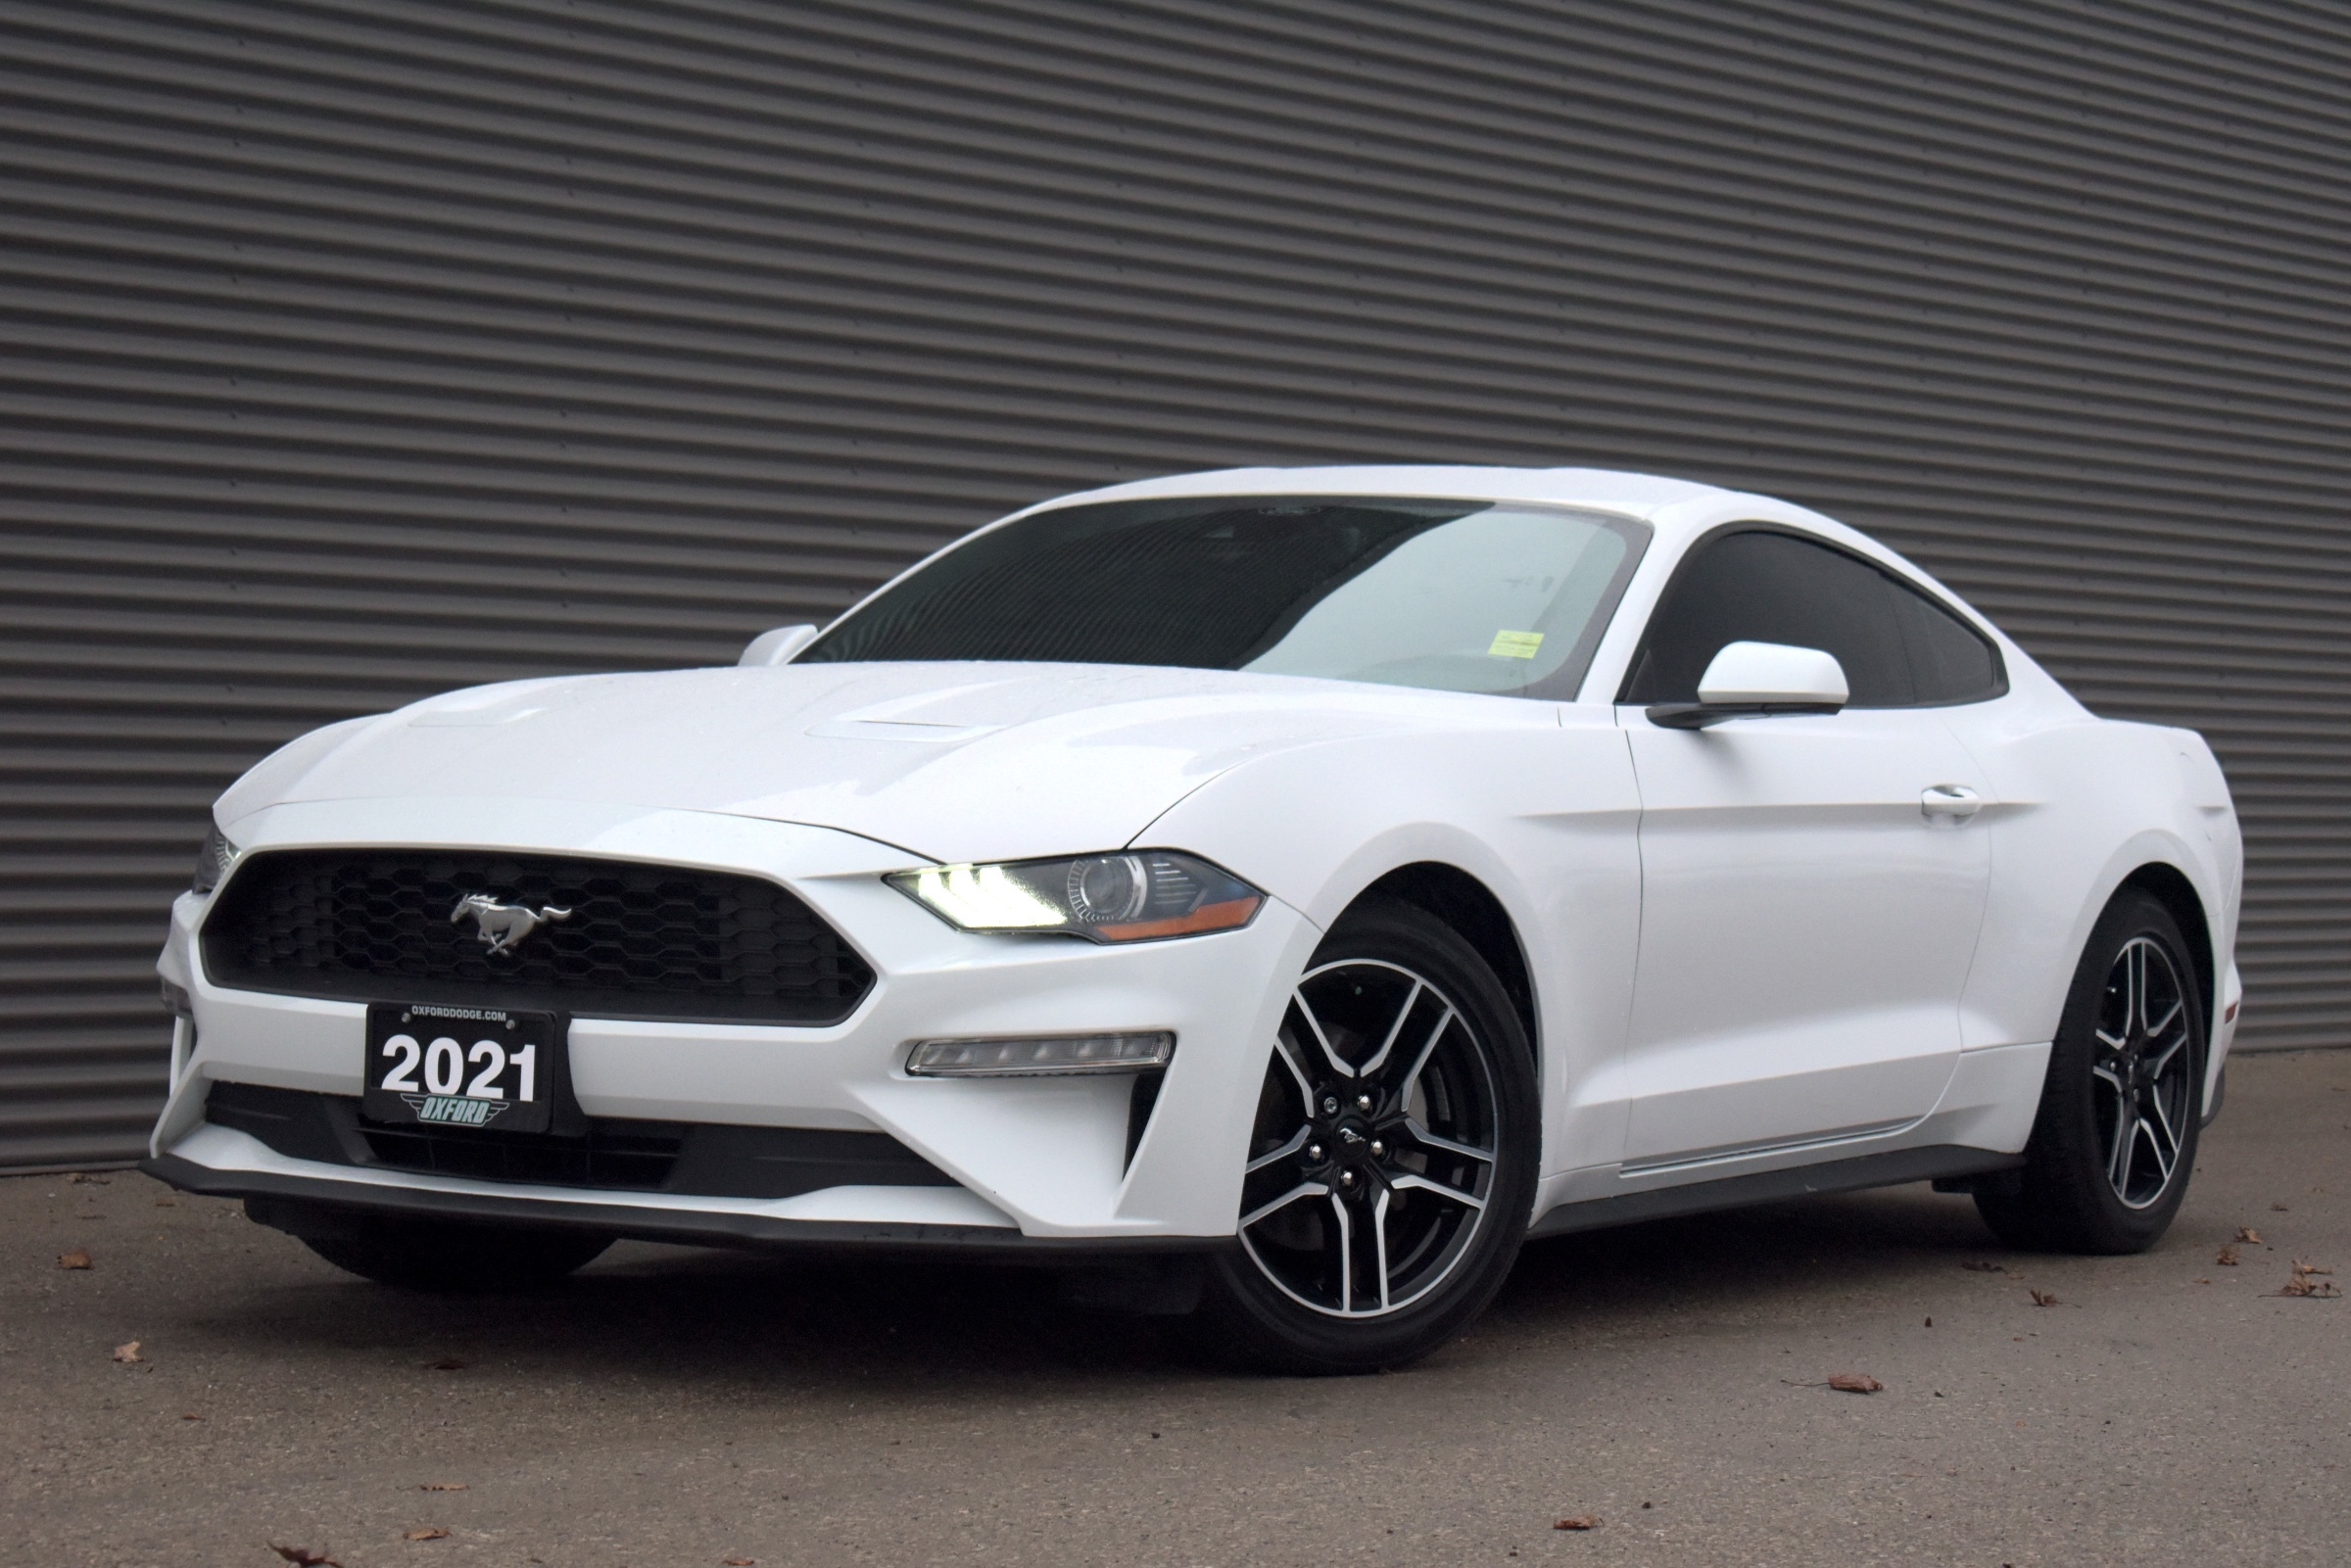 2021 Ford Mustang EcoBoost One Owner, Accident Free, Very Well Cared